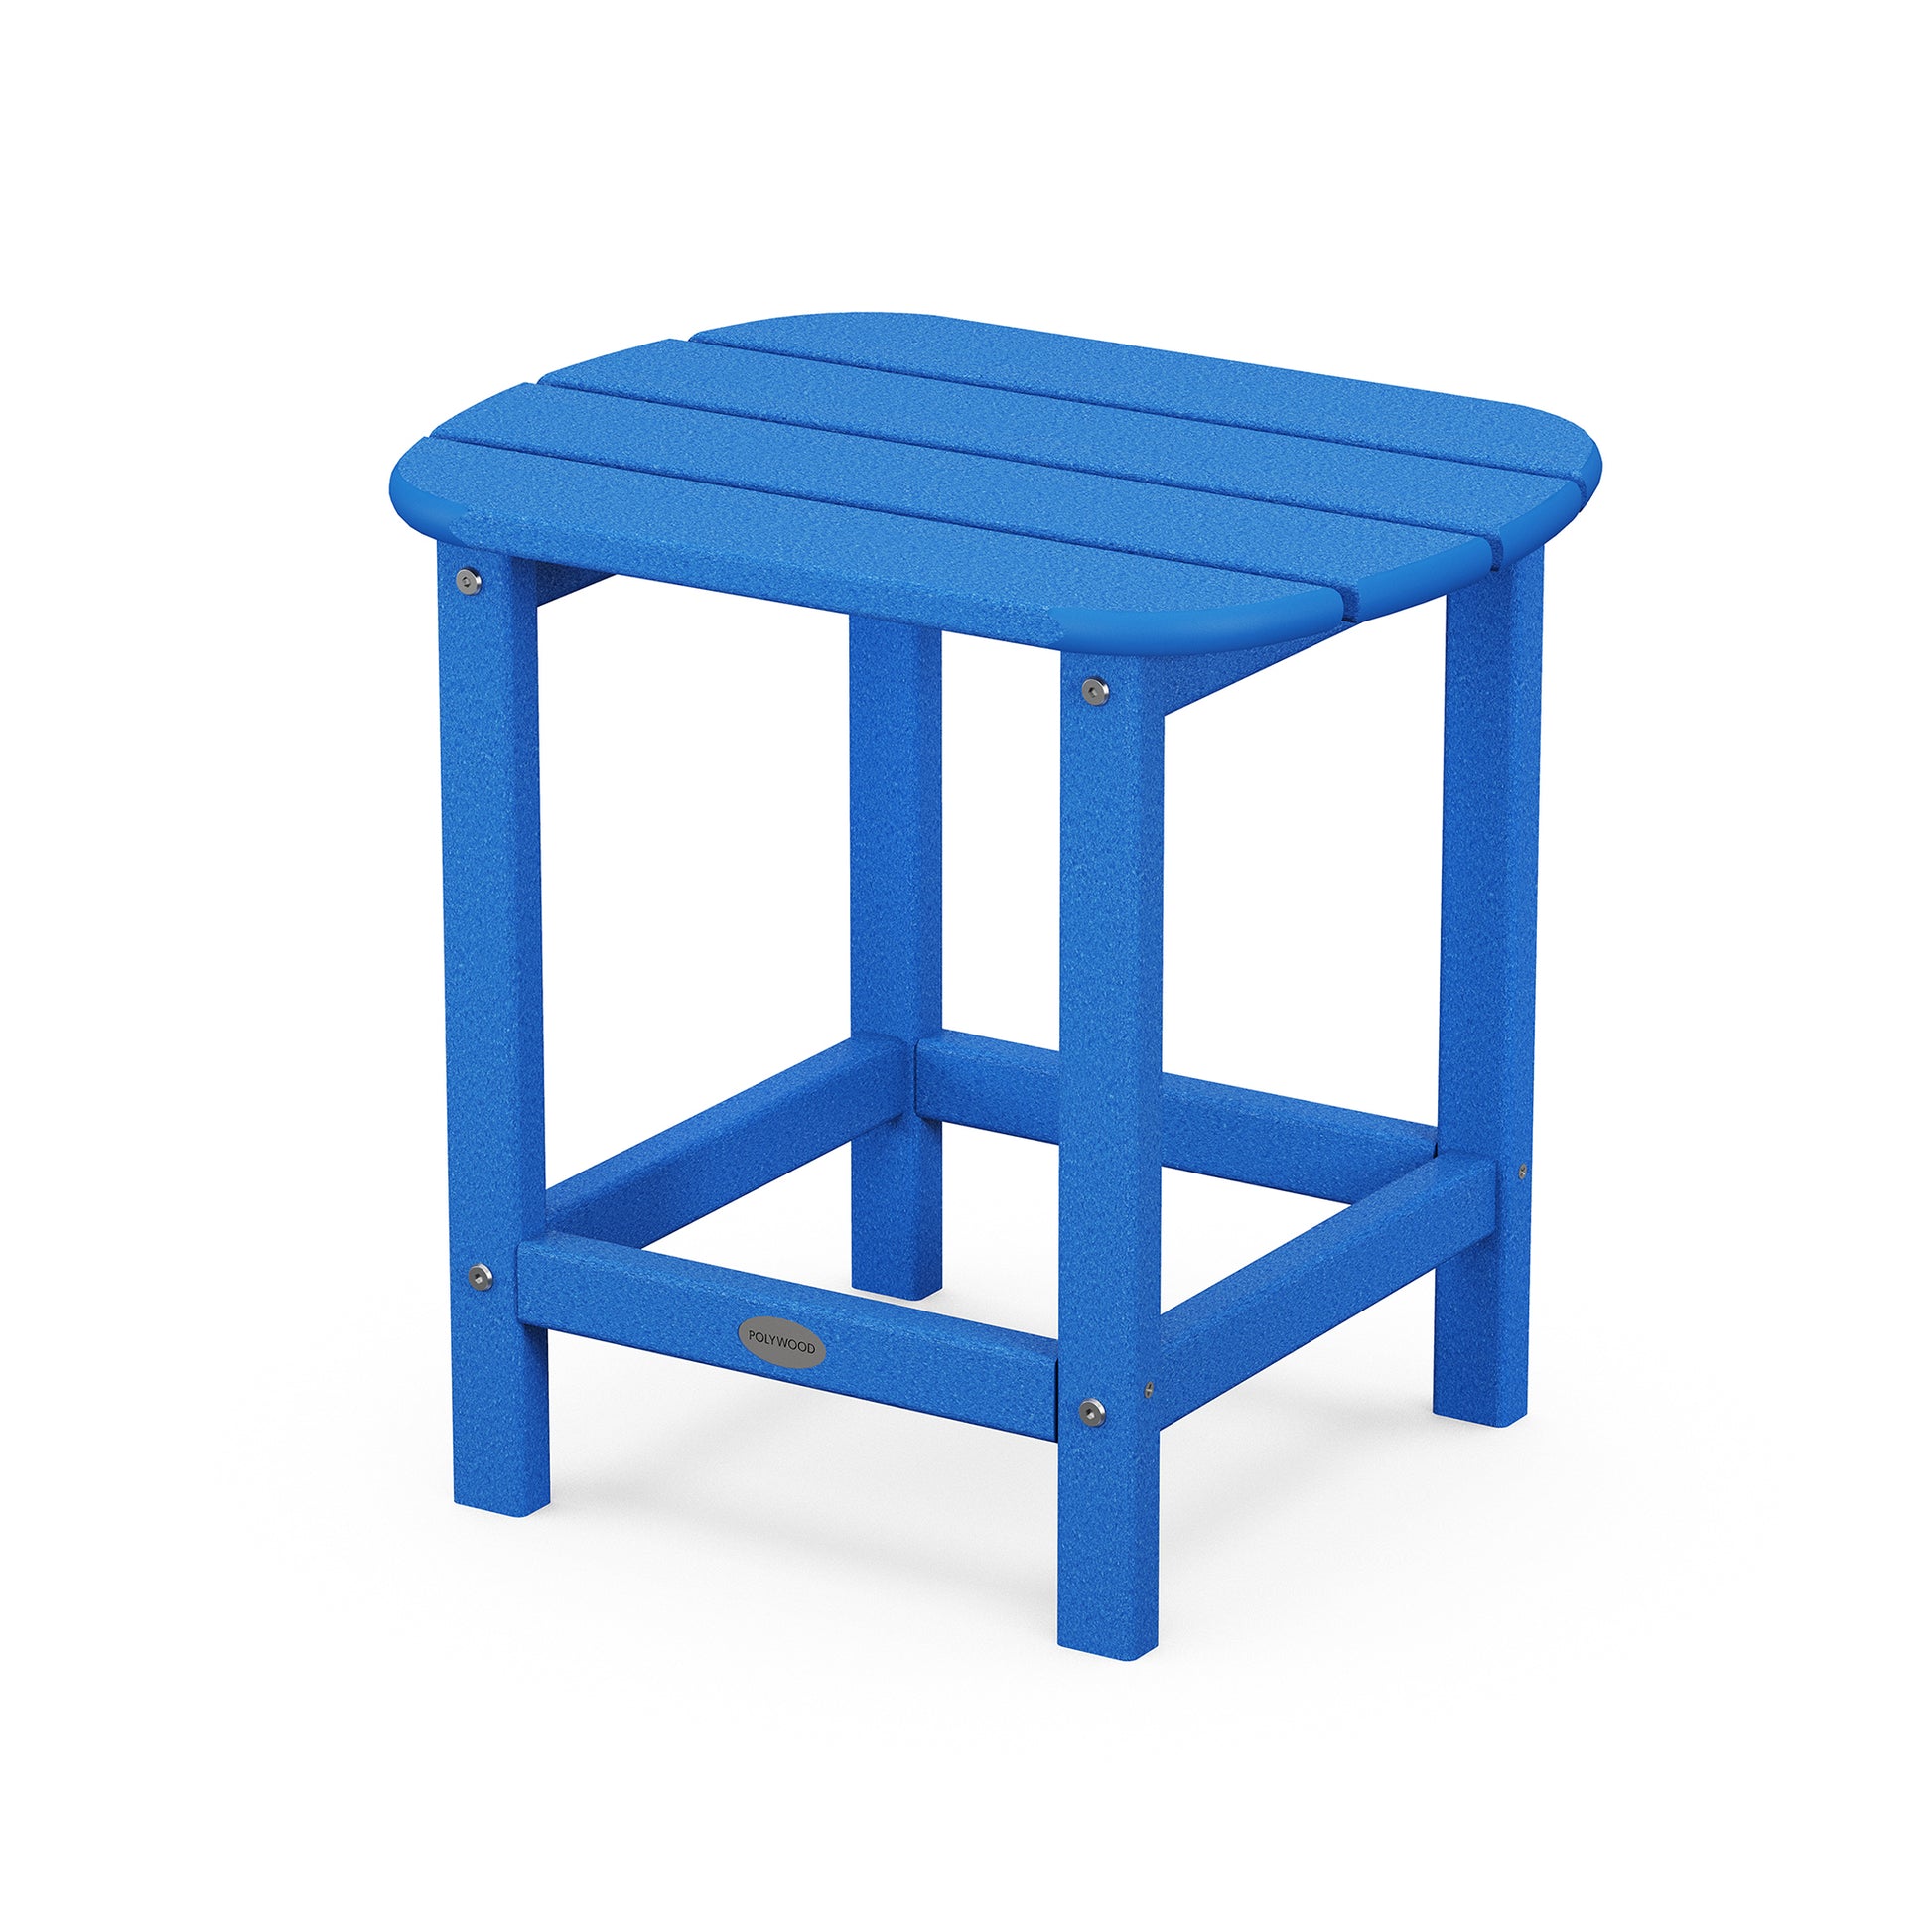 A vibrant blue POLYWOOD® South Beach Adirondack 18" Side Table made of sturdy plastic, isolated on a white background, showcasing a simple yet functional and weather-resistant design.